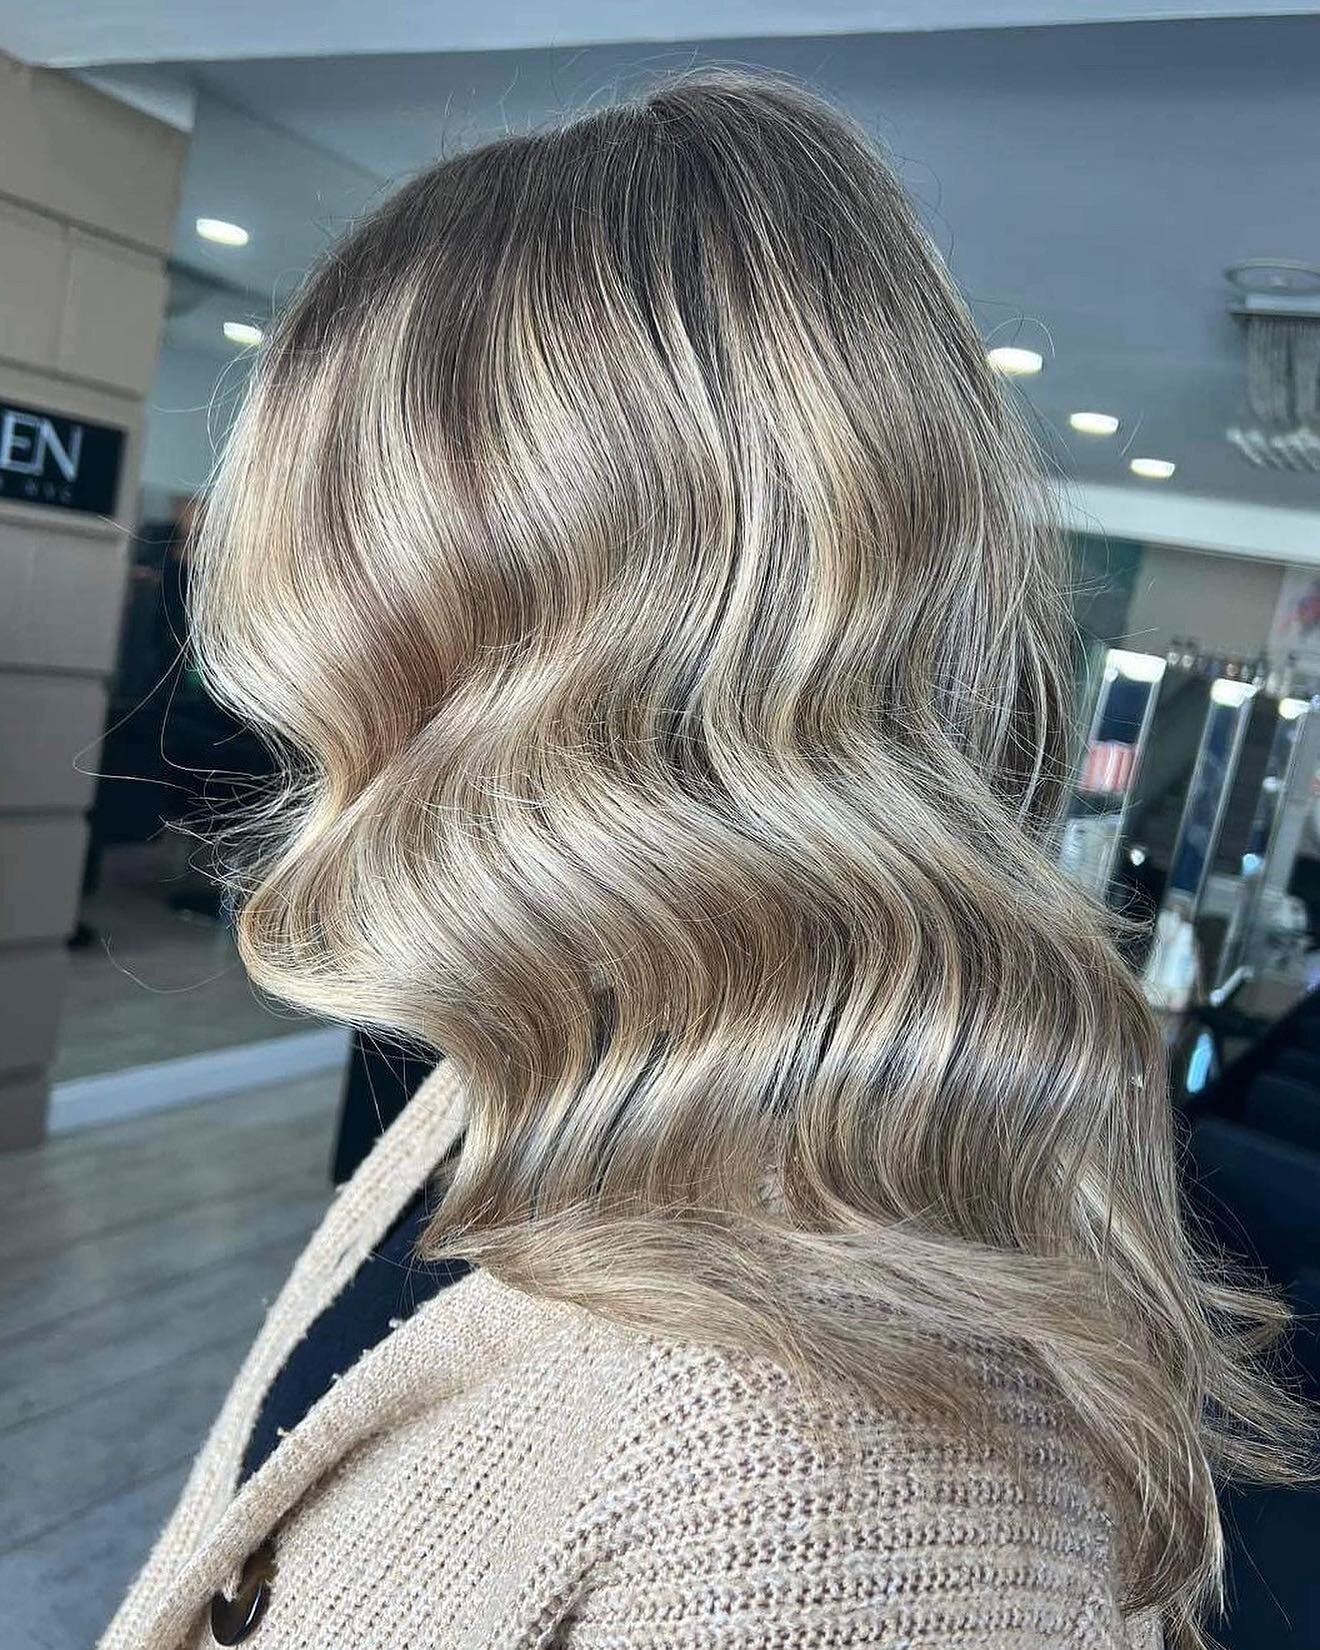 𝘽𝙡𝙤𝙣𝙙𝙚 𝘽𝙖𝙗𝙚 ✨

Let&rsquo;s just take a moment to appreciate this shall we? 

The colour! The shine! Loooove it! 😍 By our Master Stylist 𝙅𝙚𝙣𝙣𝙖 🖤

#ashleyclarkesignaturesalon #southqueensferrysalon #salon #blonde #redkenblonde #blondeg